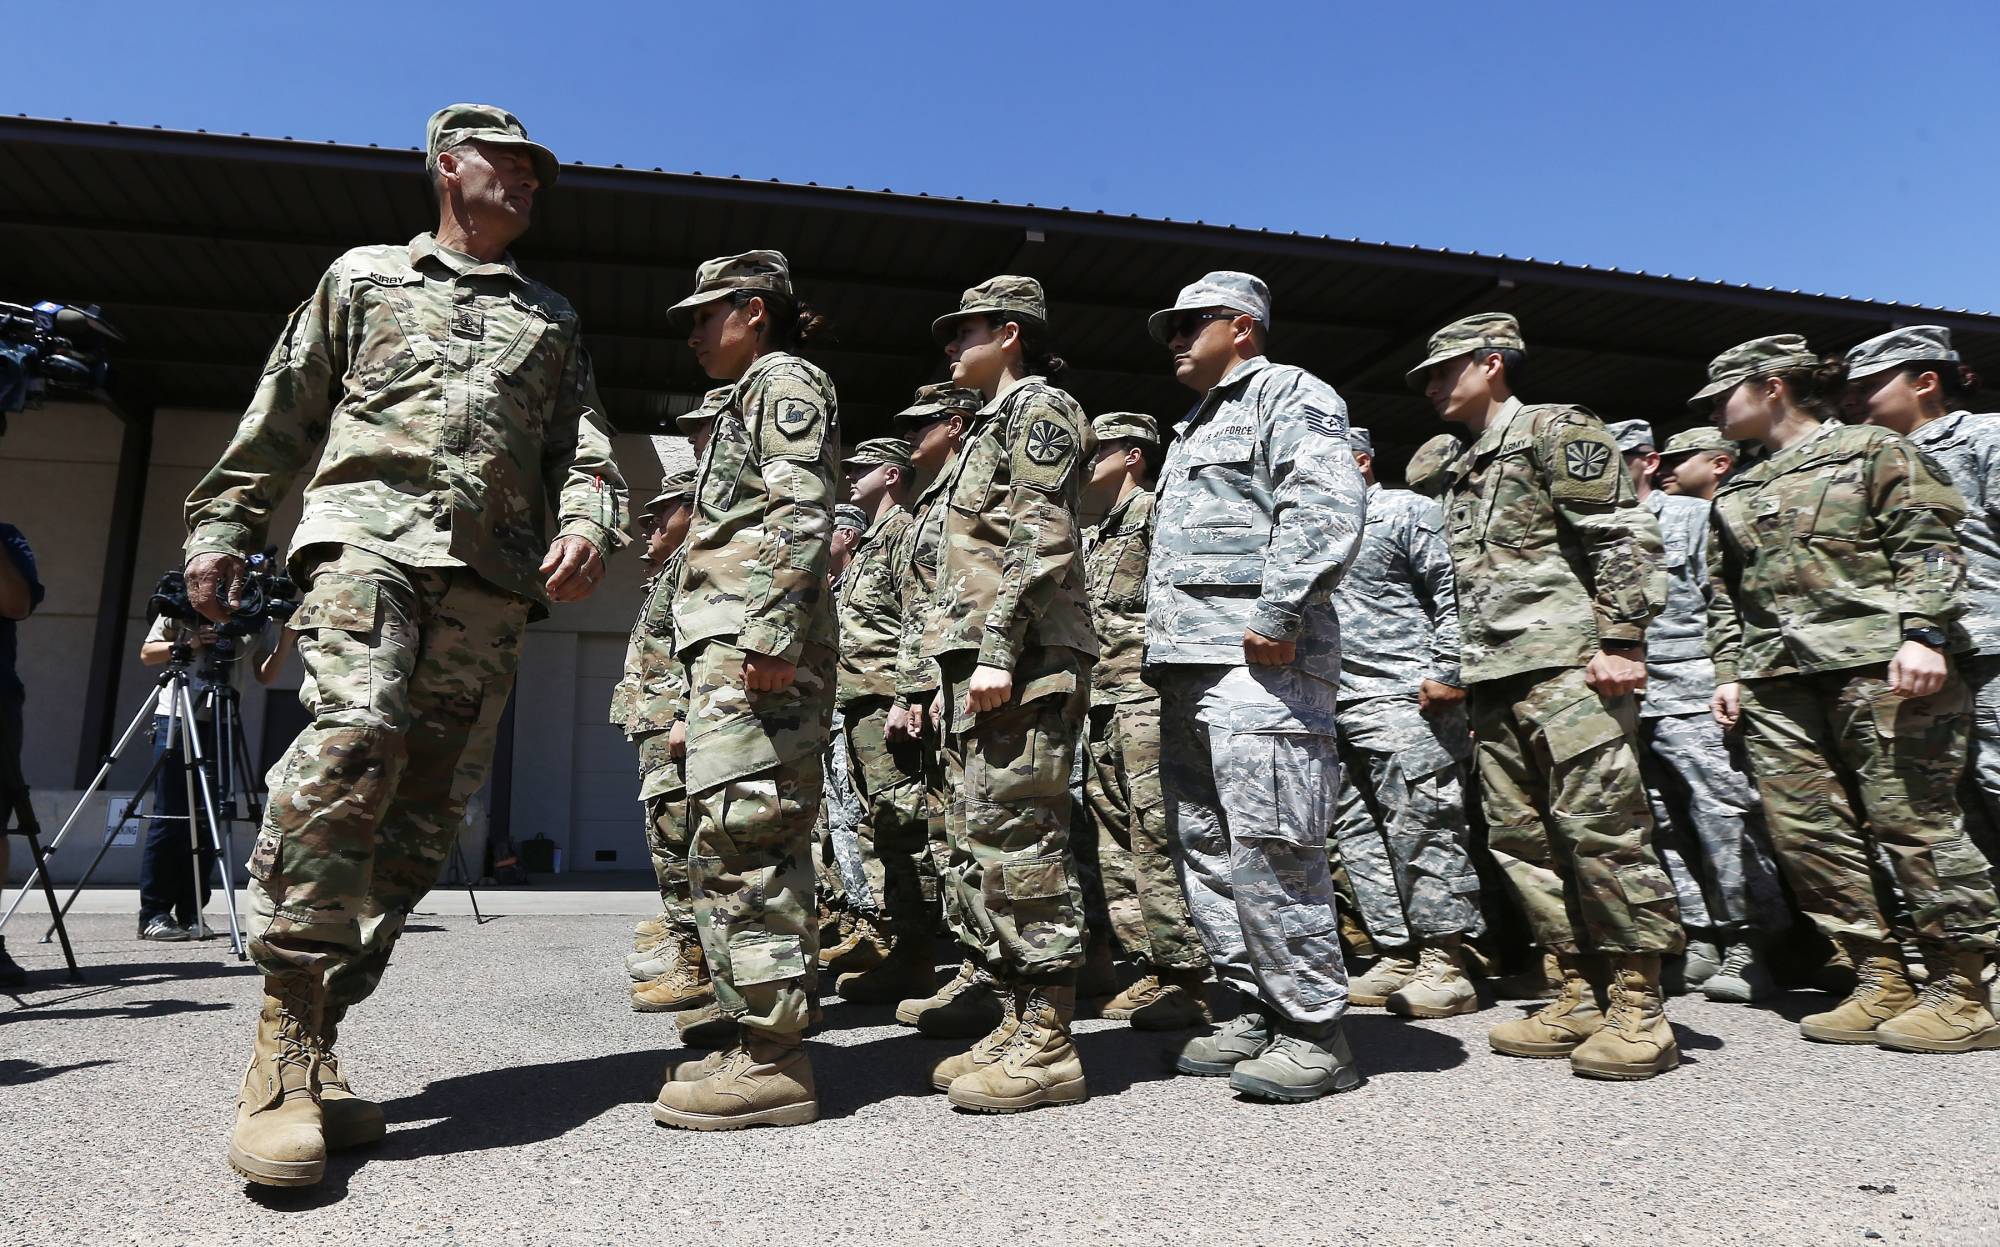 Arizona National Guard soldiers line up as they get ready for a visit from Arizona Gov. Doug Ducey prior their deployment to the Mexico border at the Papago Park Military Reservation Monday, April 9, 2018, in Phoenix. (AP Photo/Ross D. Franklin)